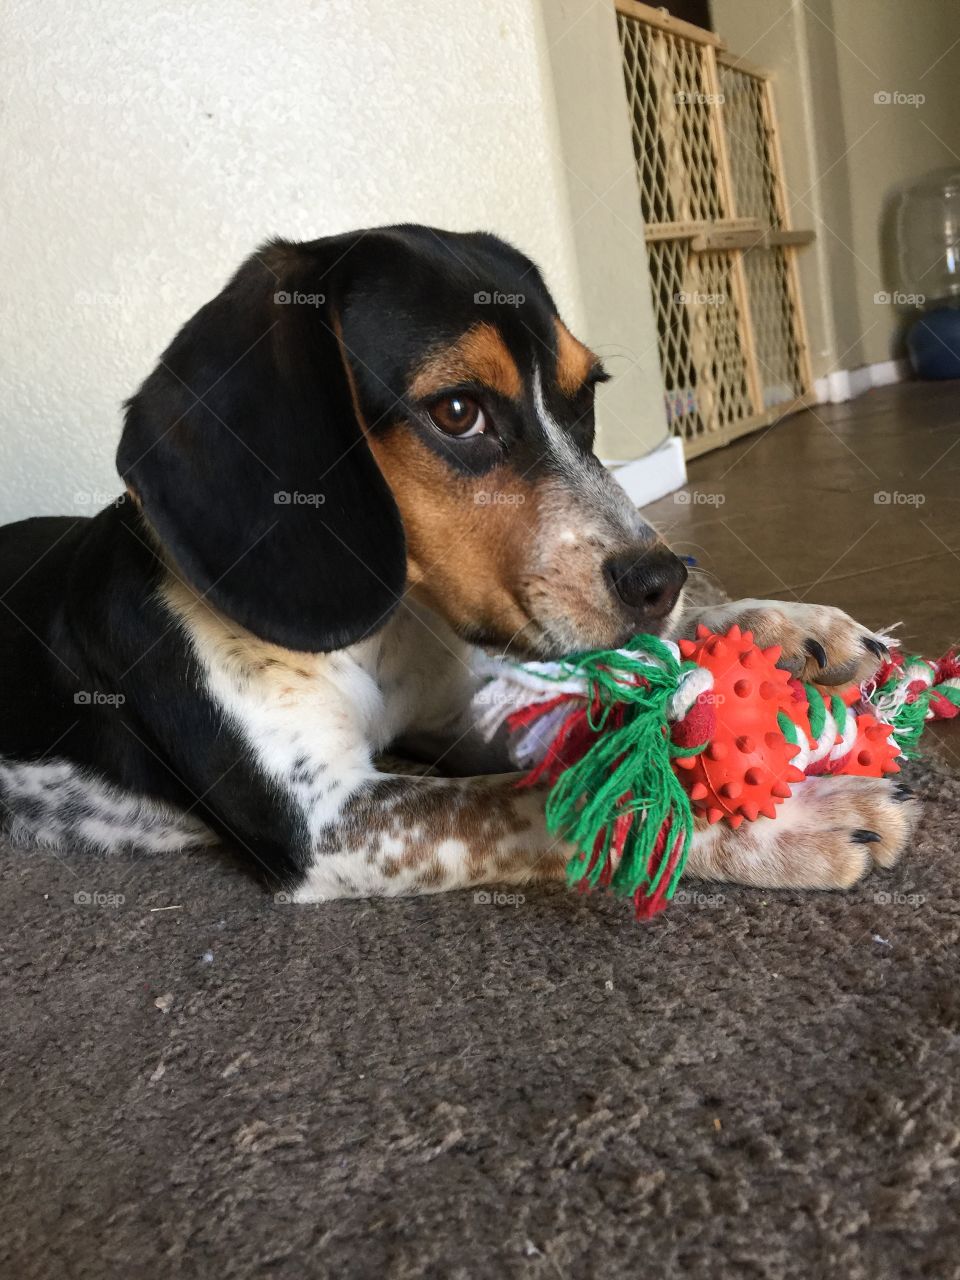 Playing with her toy